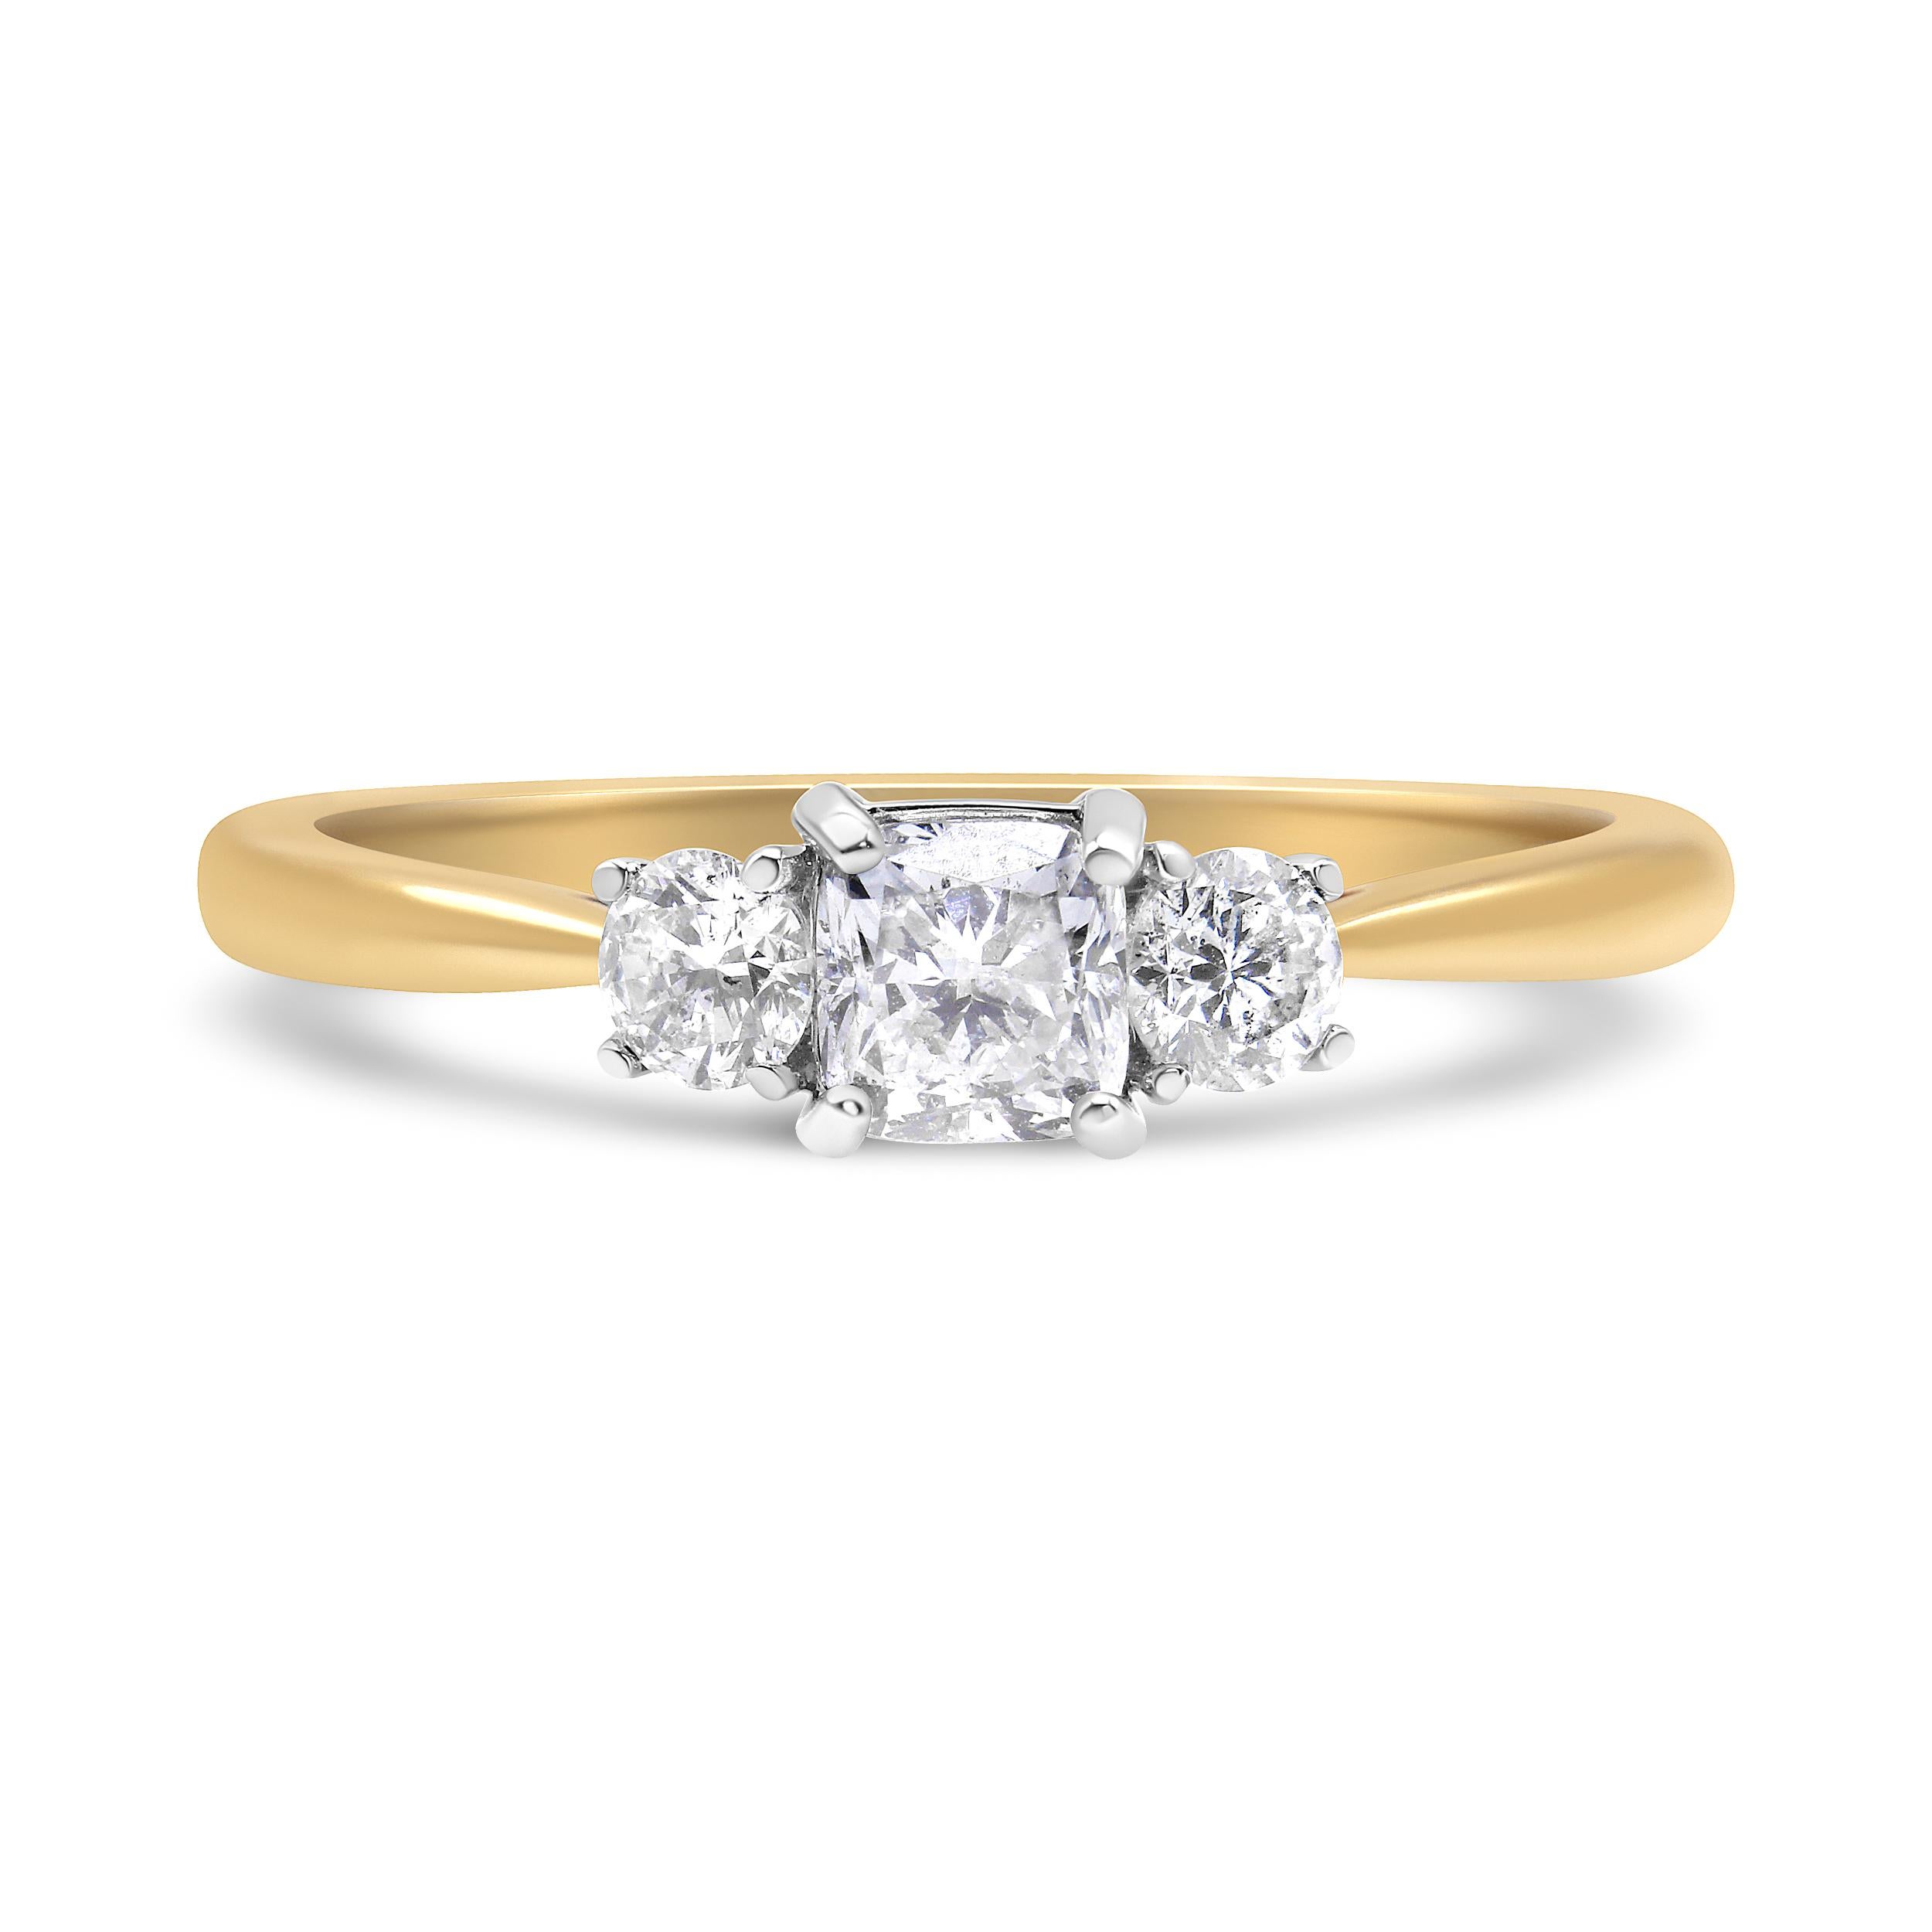 Ask for her hand with this chic engagement ring inspired by the original Bostonian 3 stone engagement ring. Crafted in from warm 14K yellow gold, this sparkling look showcases a .45 ct. Cushion-cut diamond flanked by two 1/6 ct. round-cut diamonds.